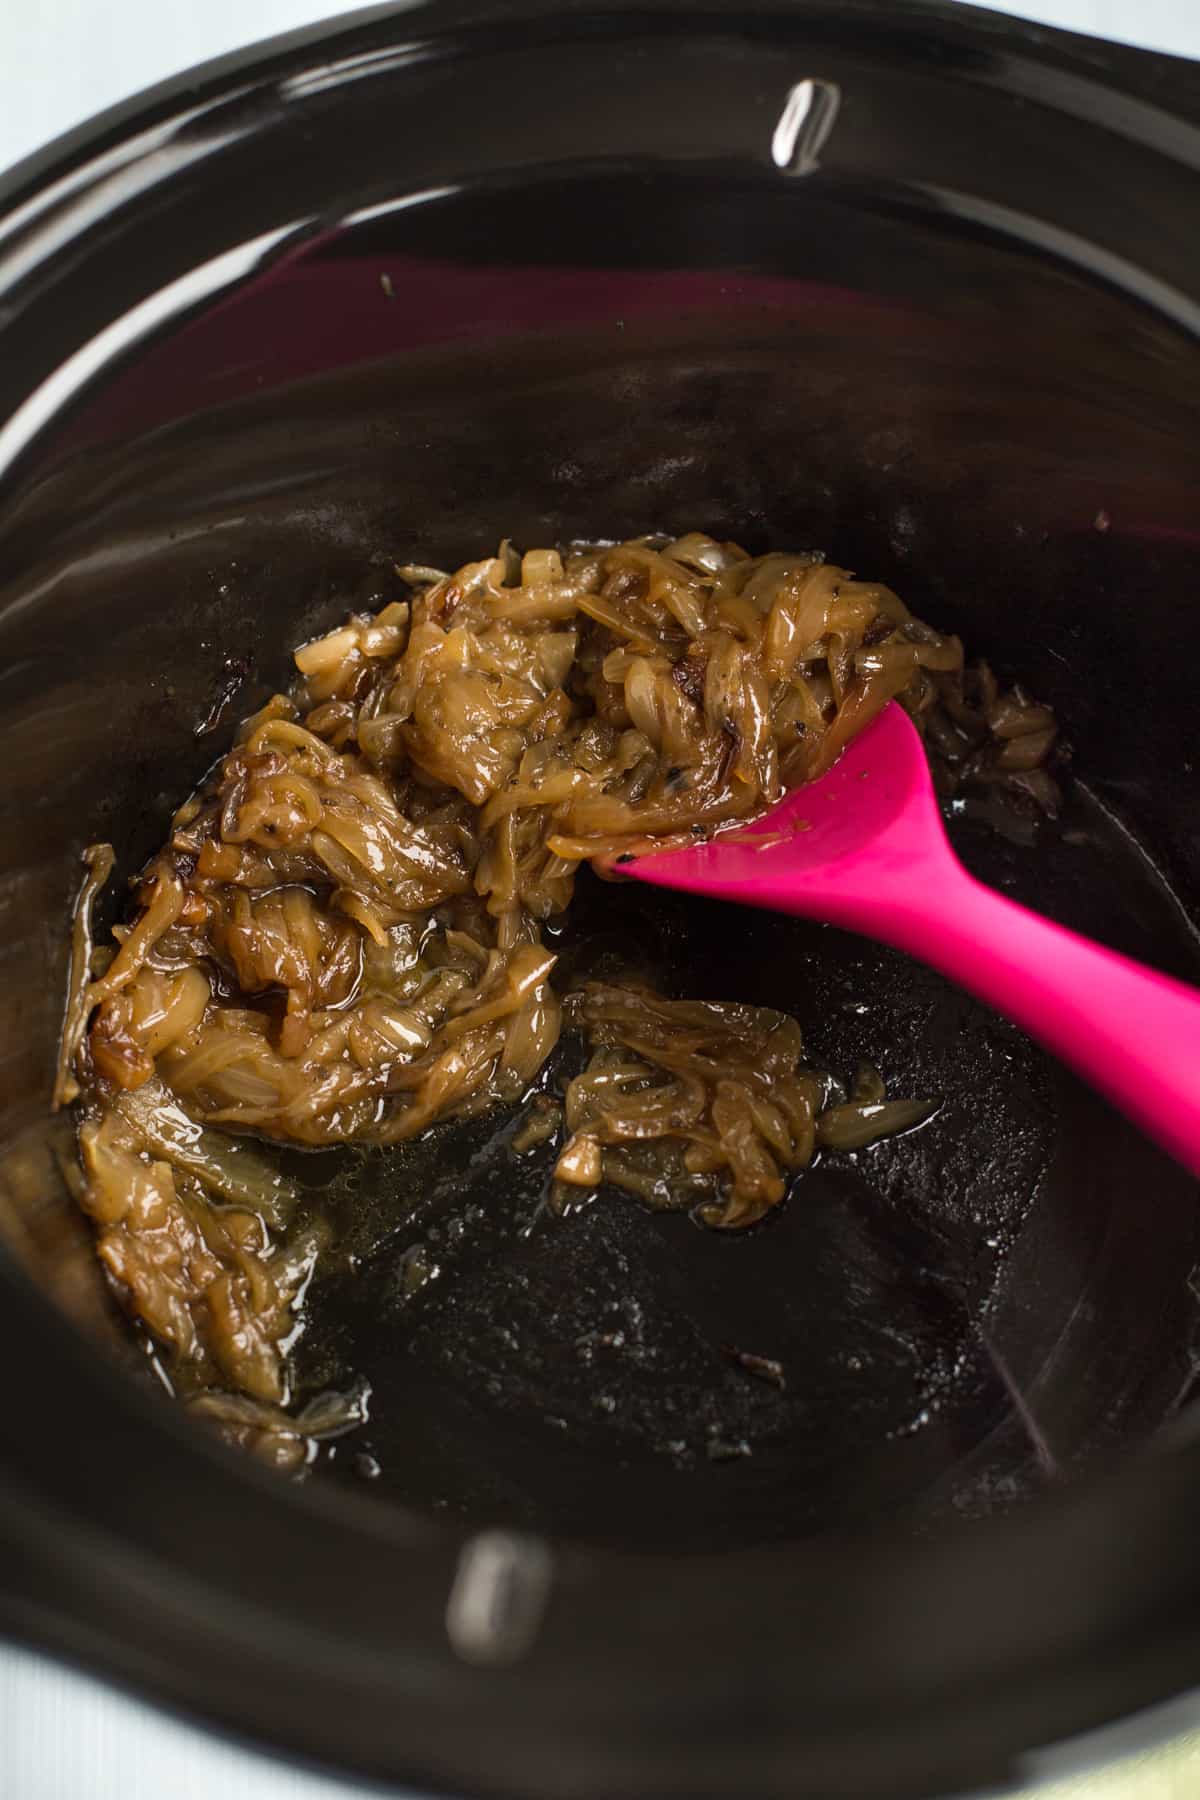 Caramelised onions in a slow cooker.